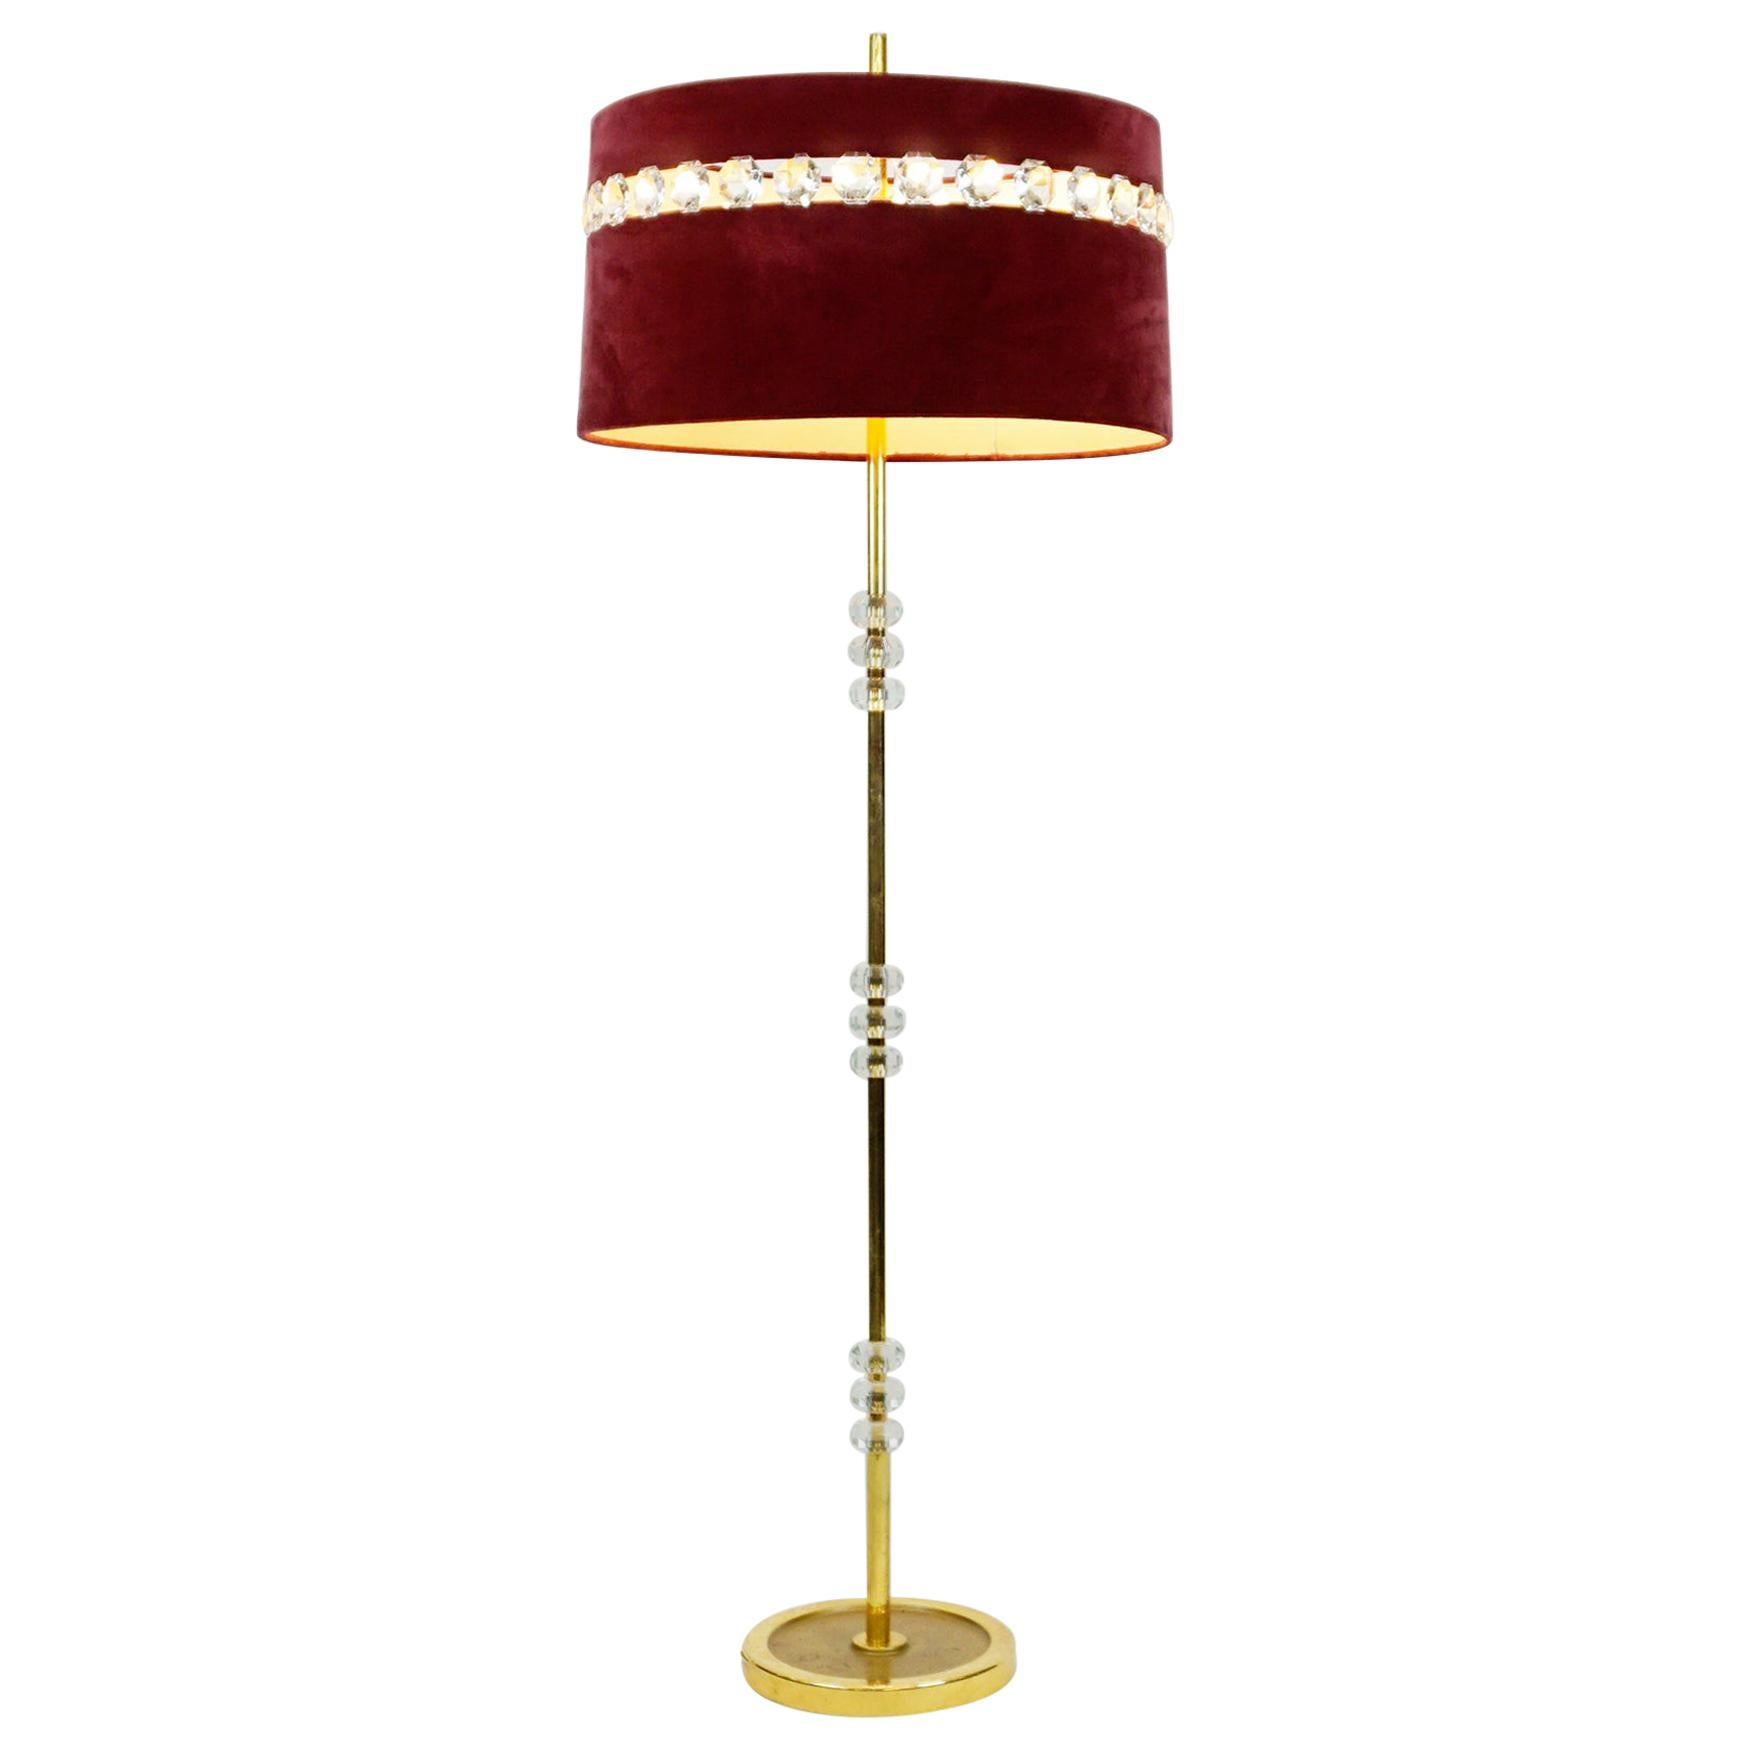 Austrian Midcentury Brass and Crystal Glass Floor Lamp with Red Velvet Shade